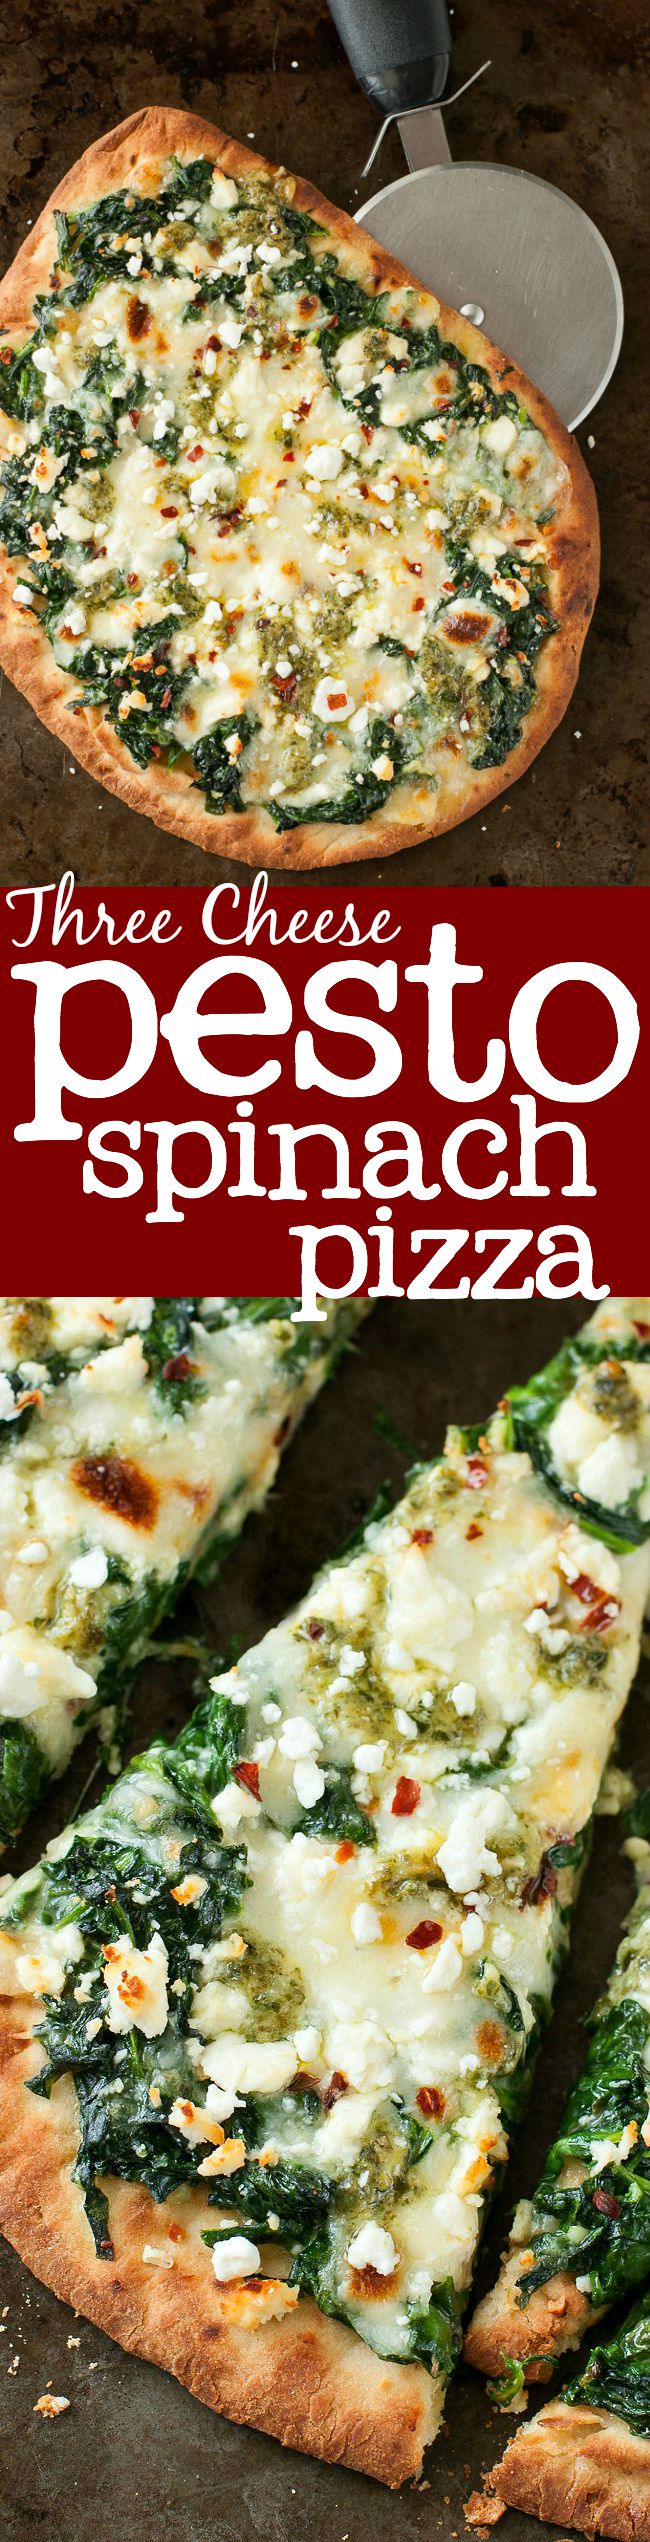 Three Cheese Pesto Spinach Flatbread Pizza :: alternate title: how to eat an entire 5oz box of spinach for lunch without making a salad!